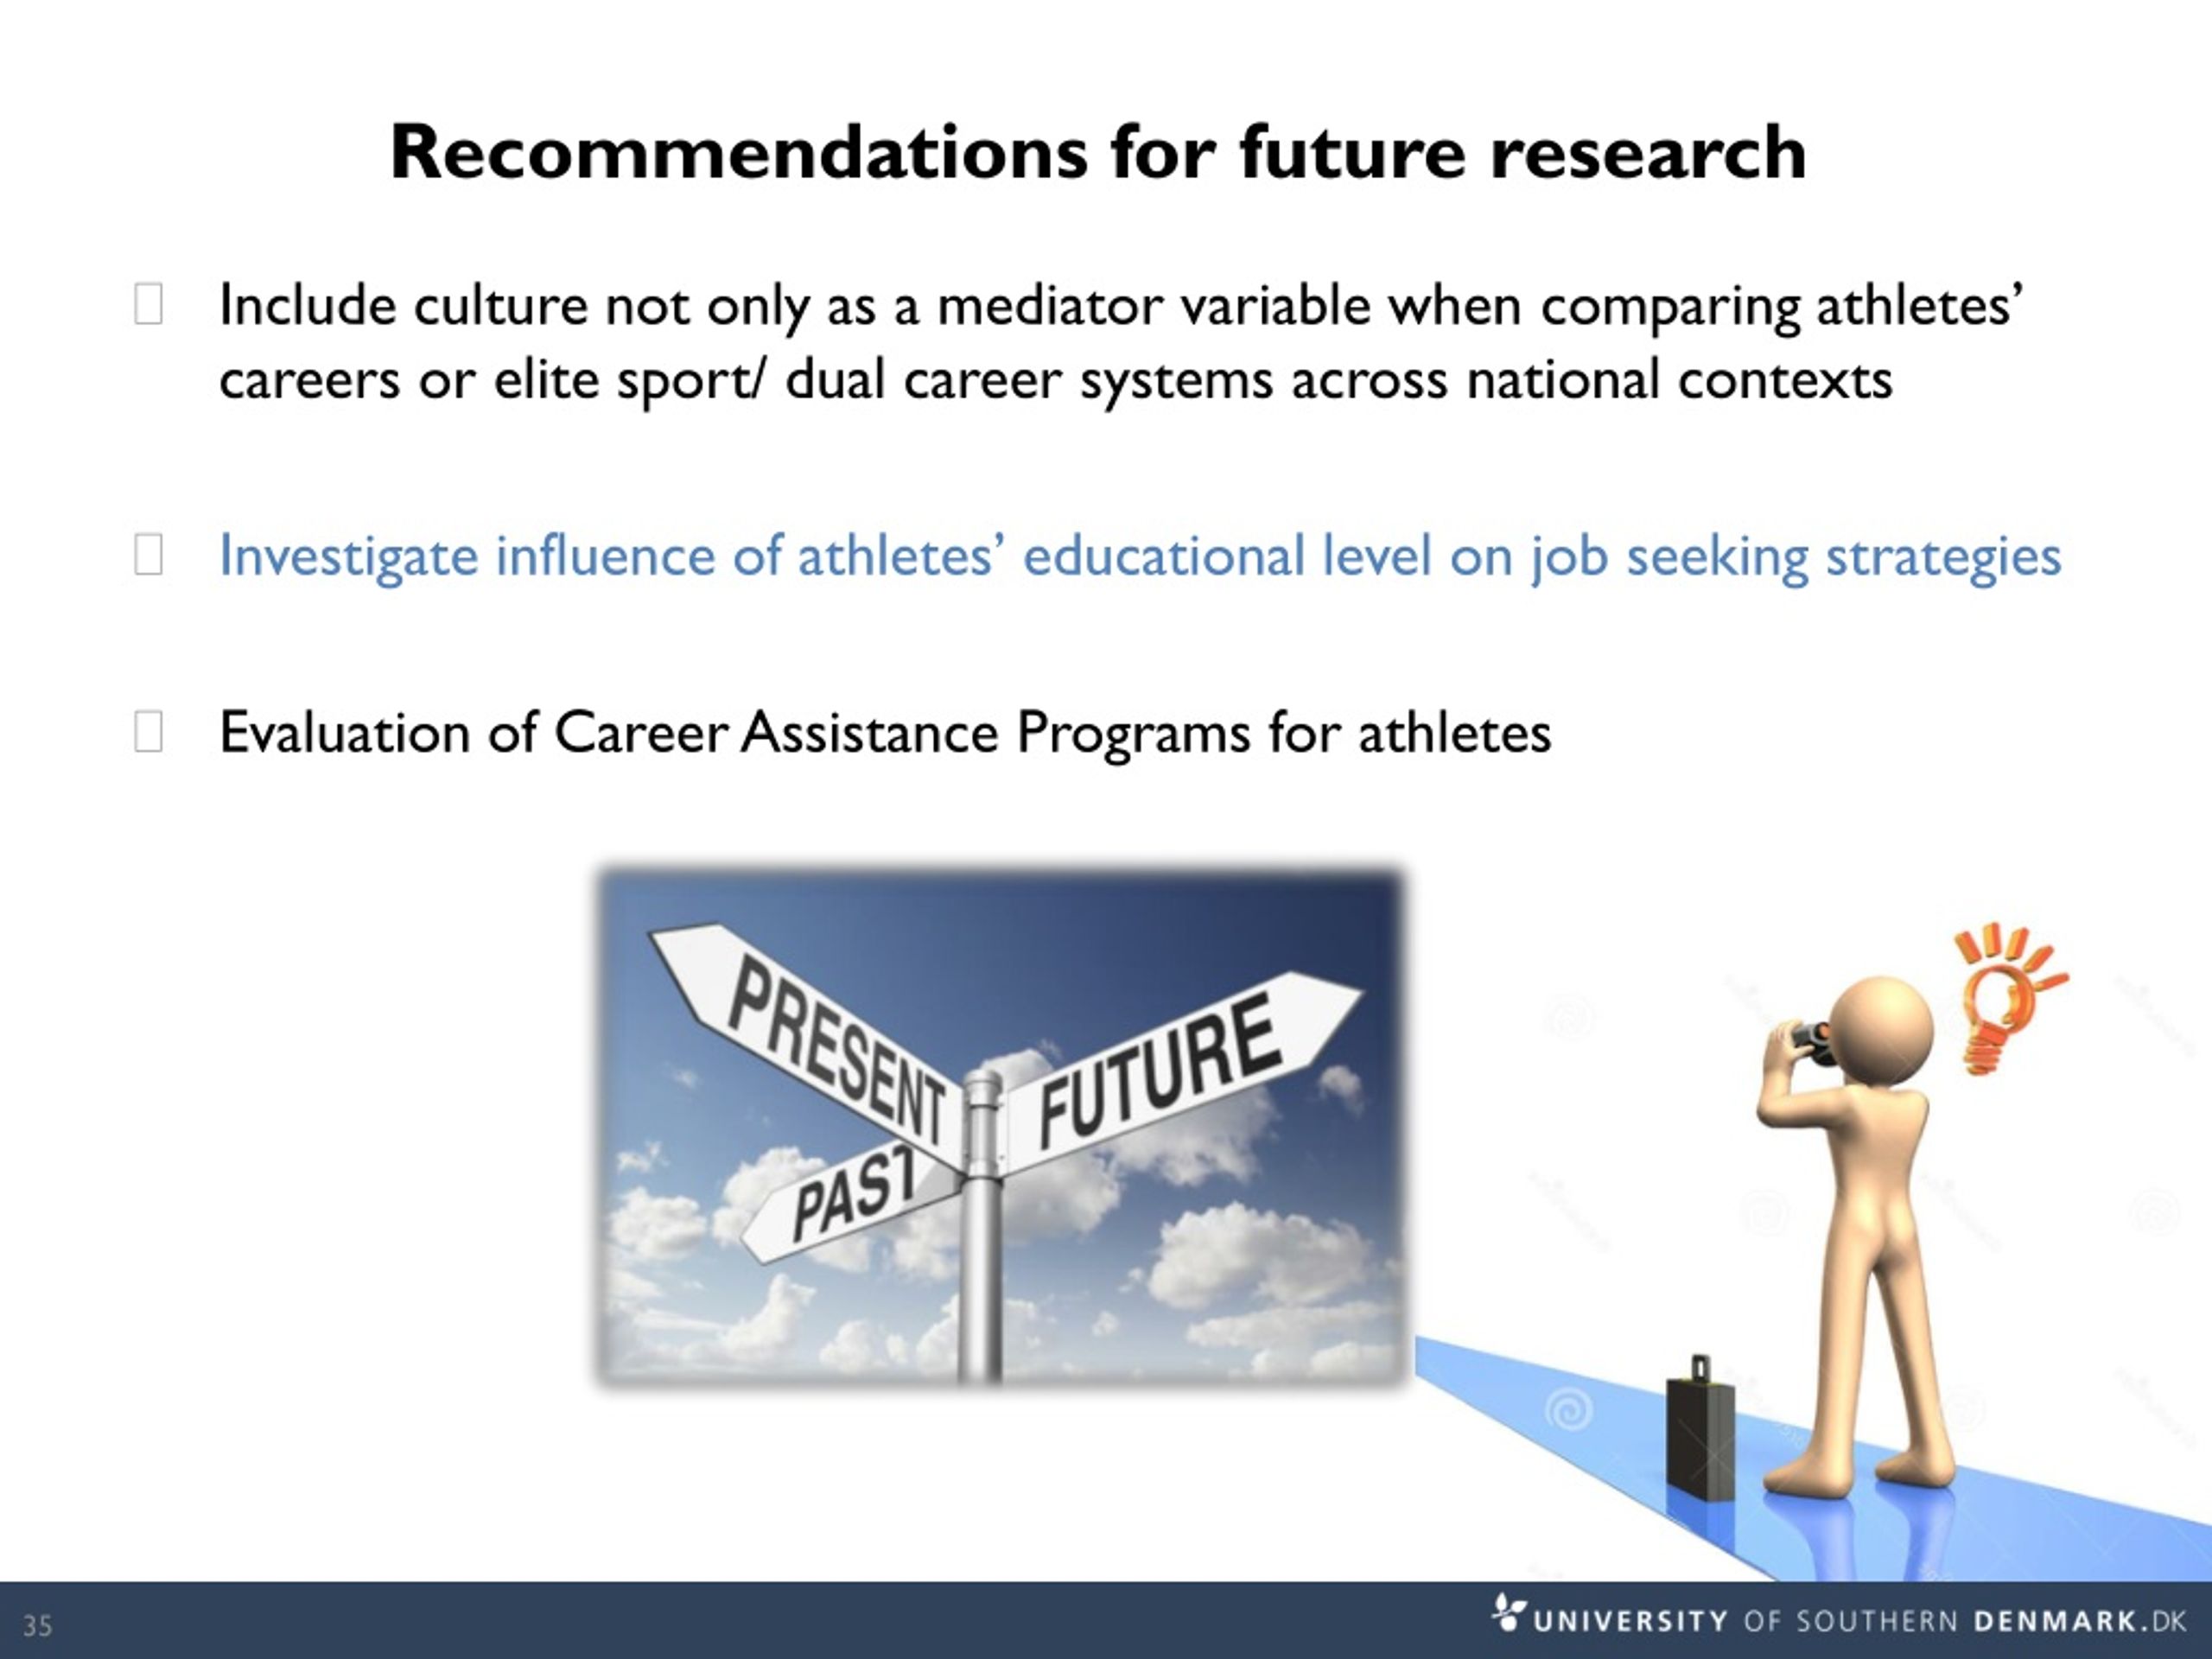 what is your recommendation for future research